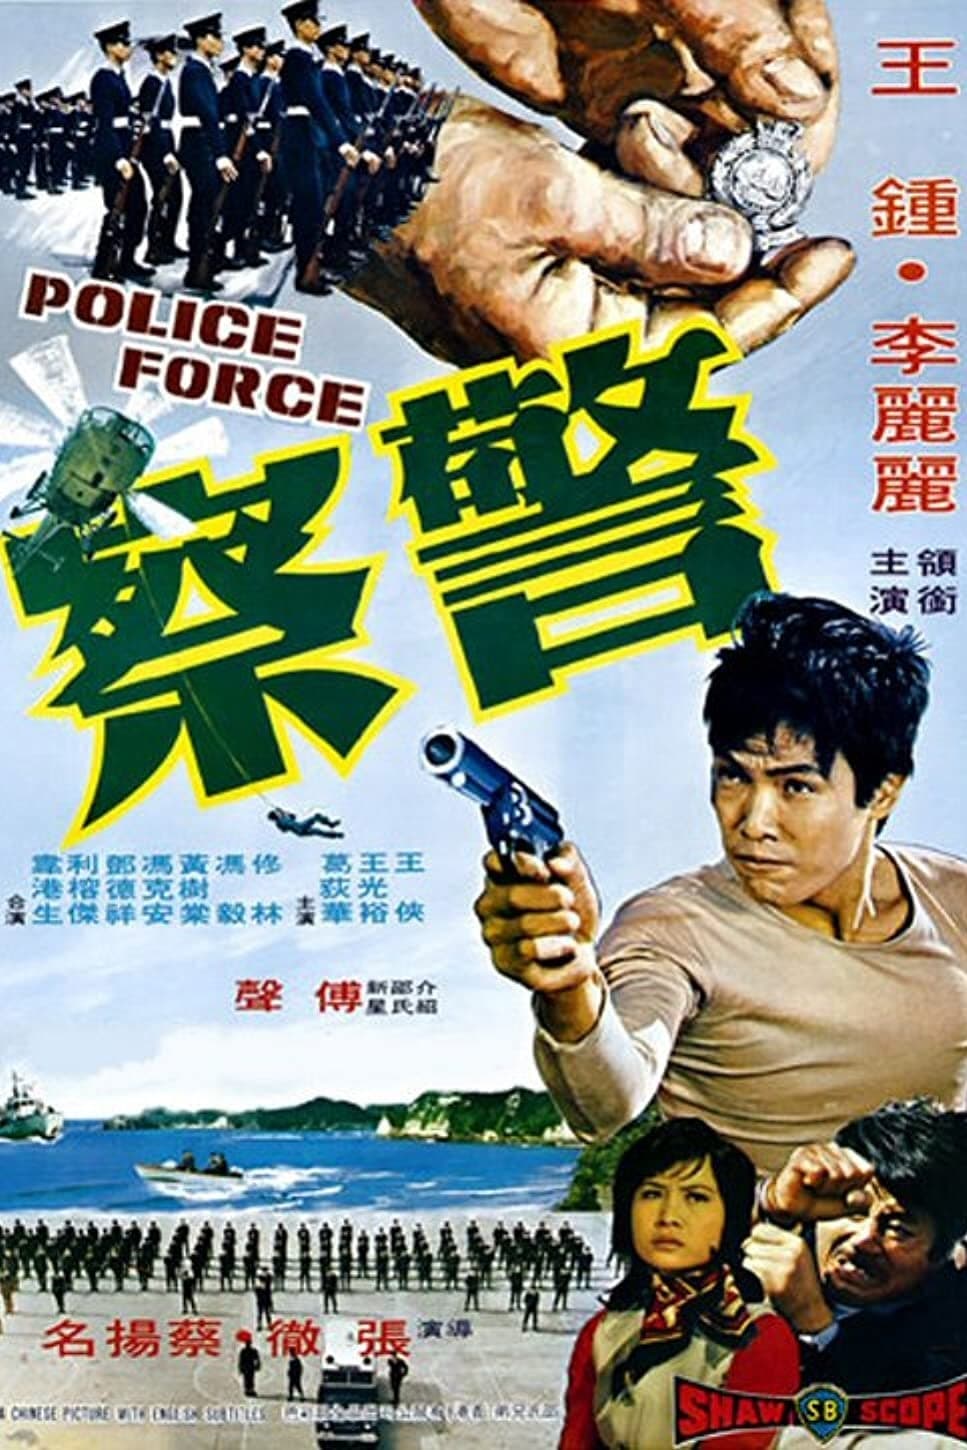 Police Force (1973)